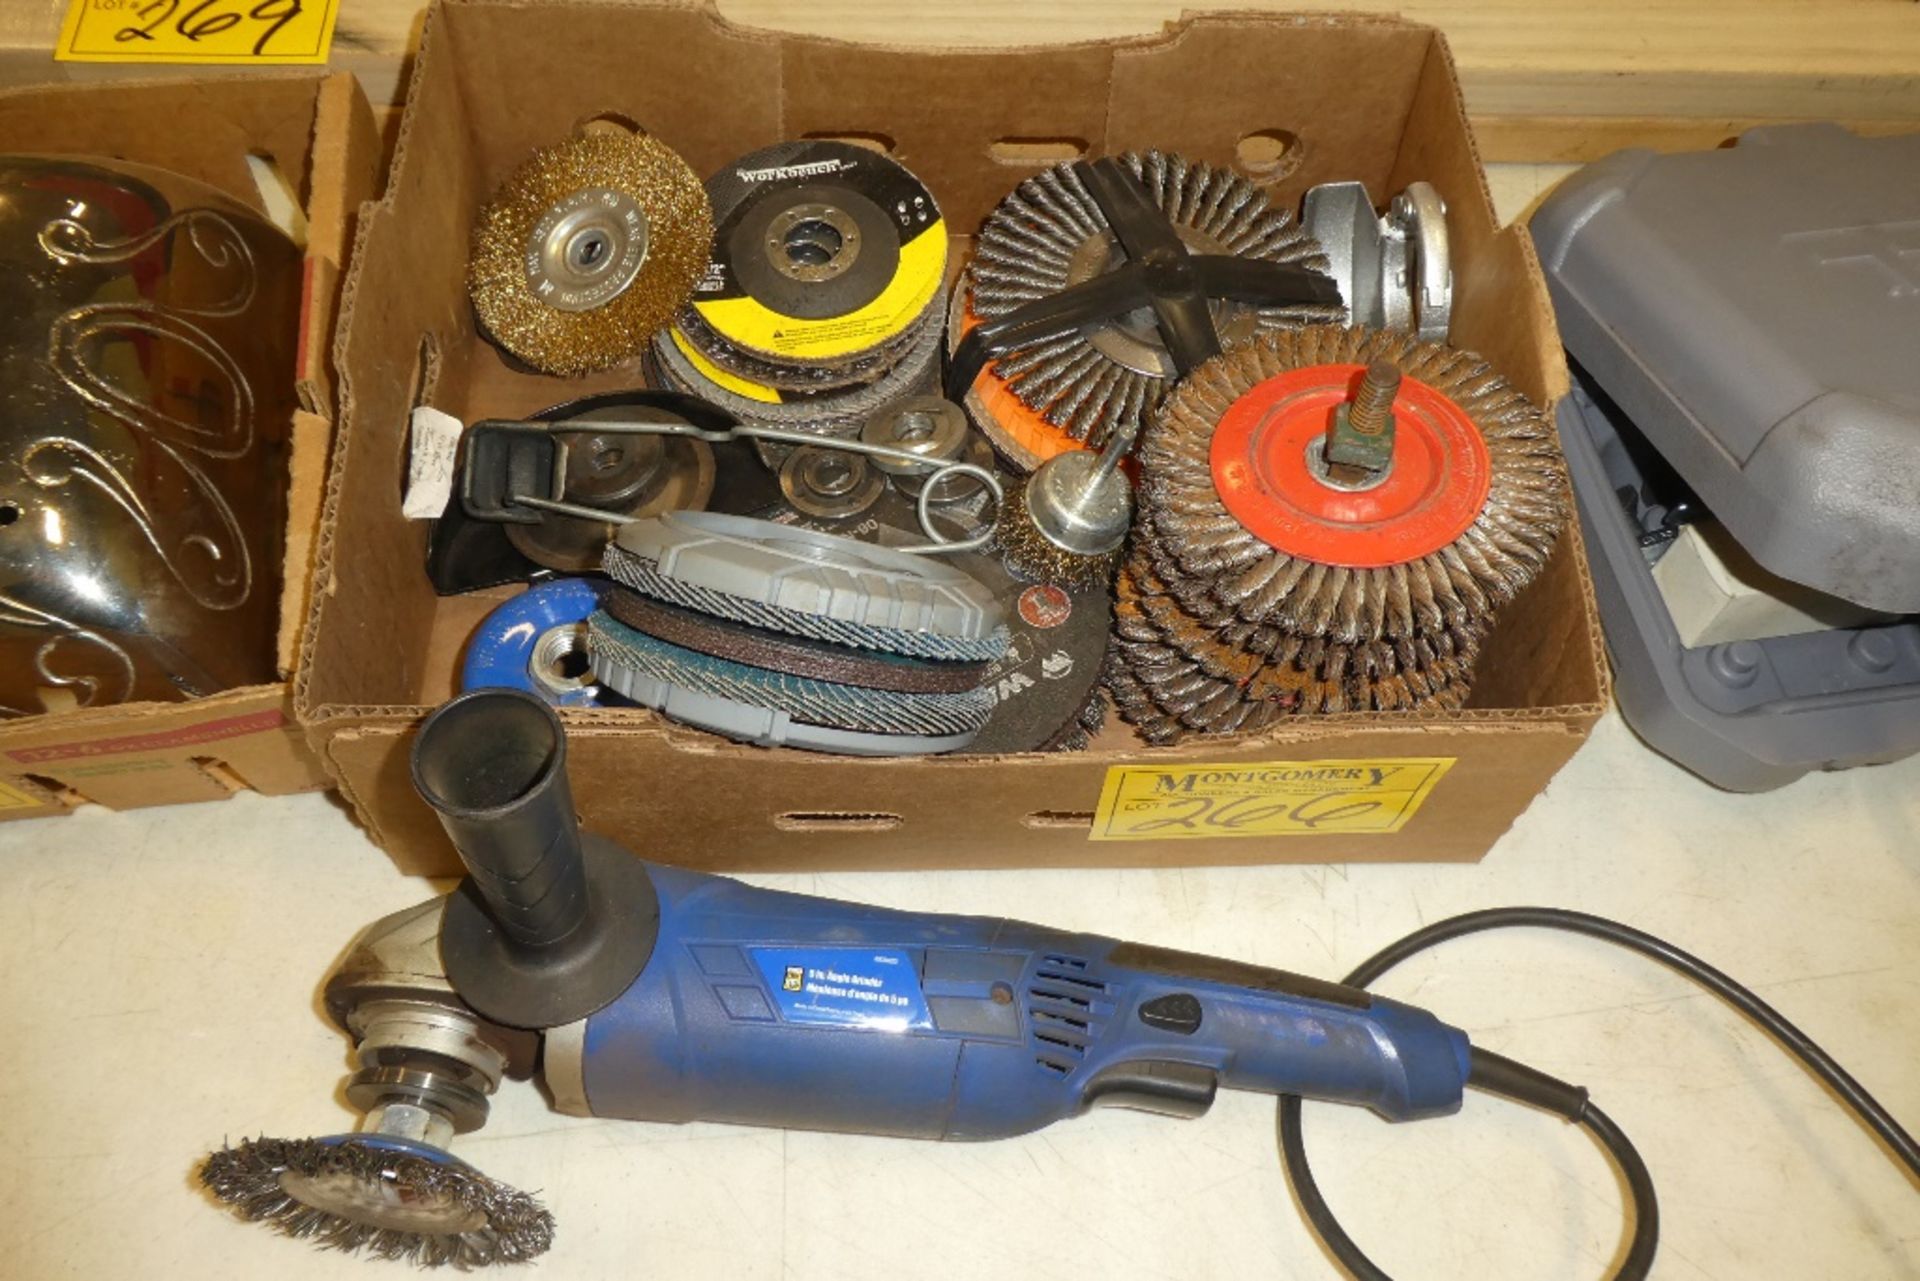 POWER FIST 5" ANGLE GRINDER W/ GRINDING WHEELS & DISCS